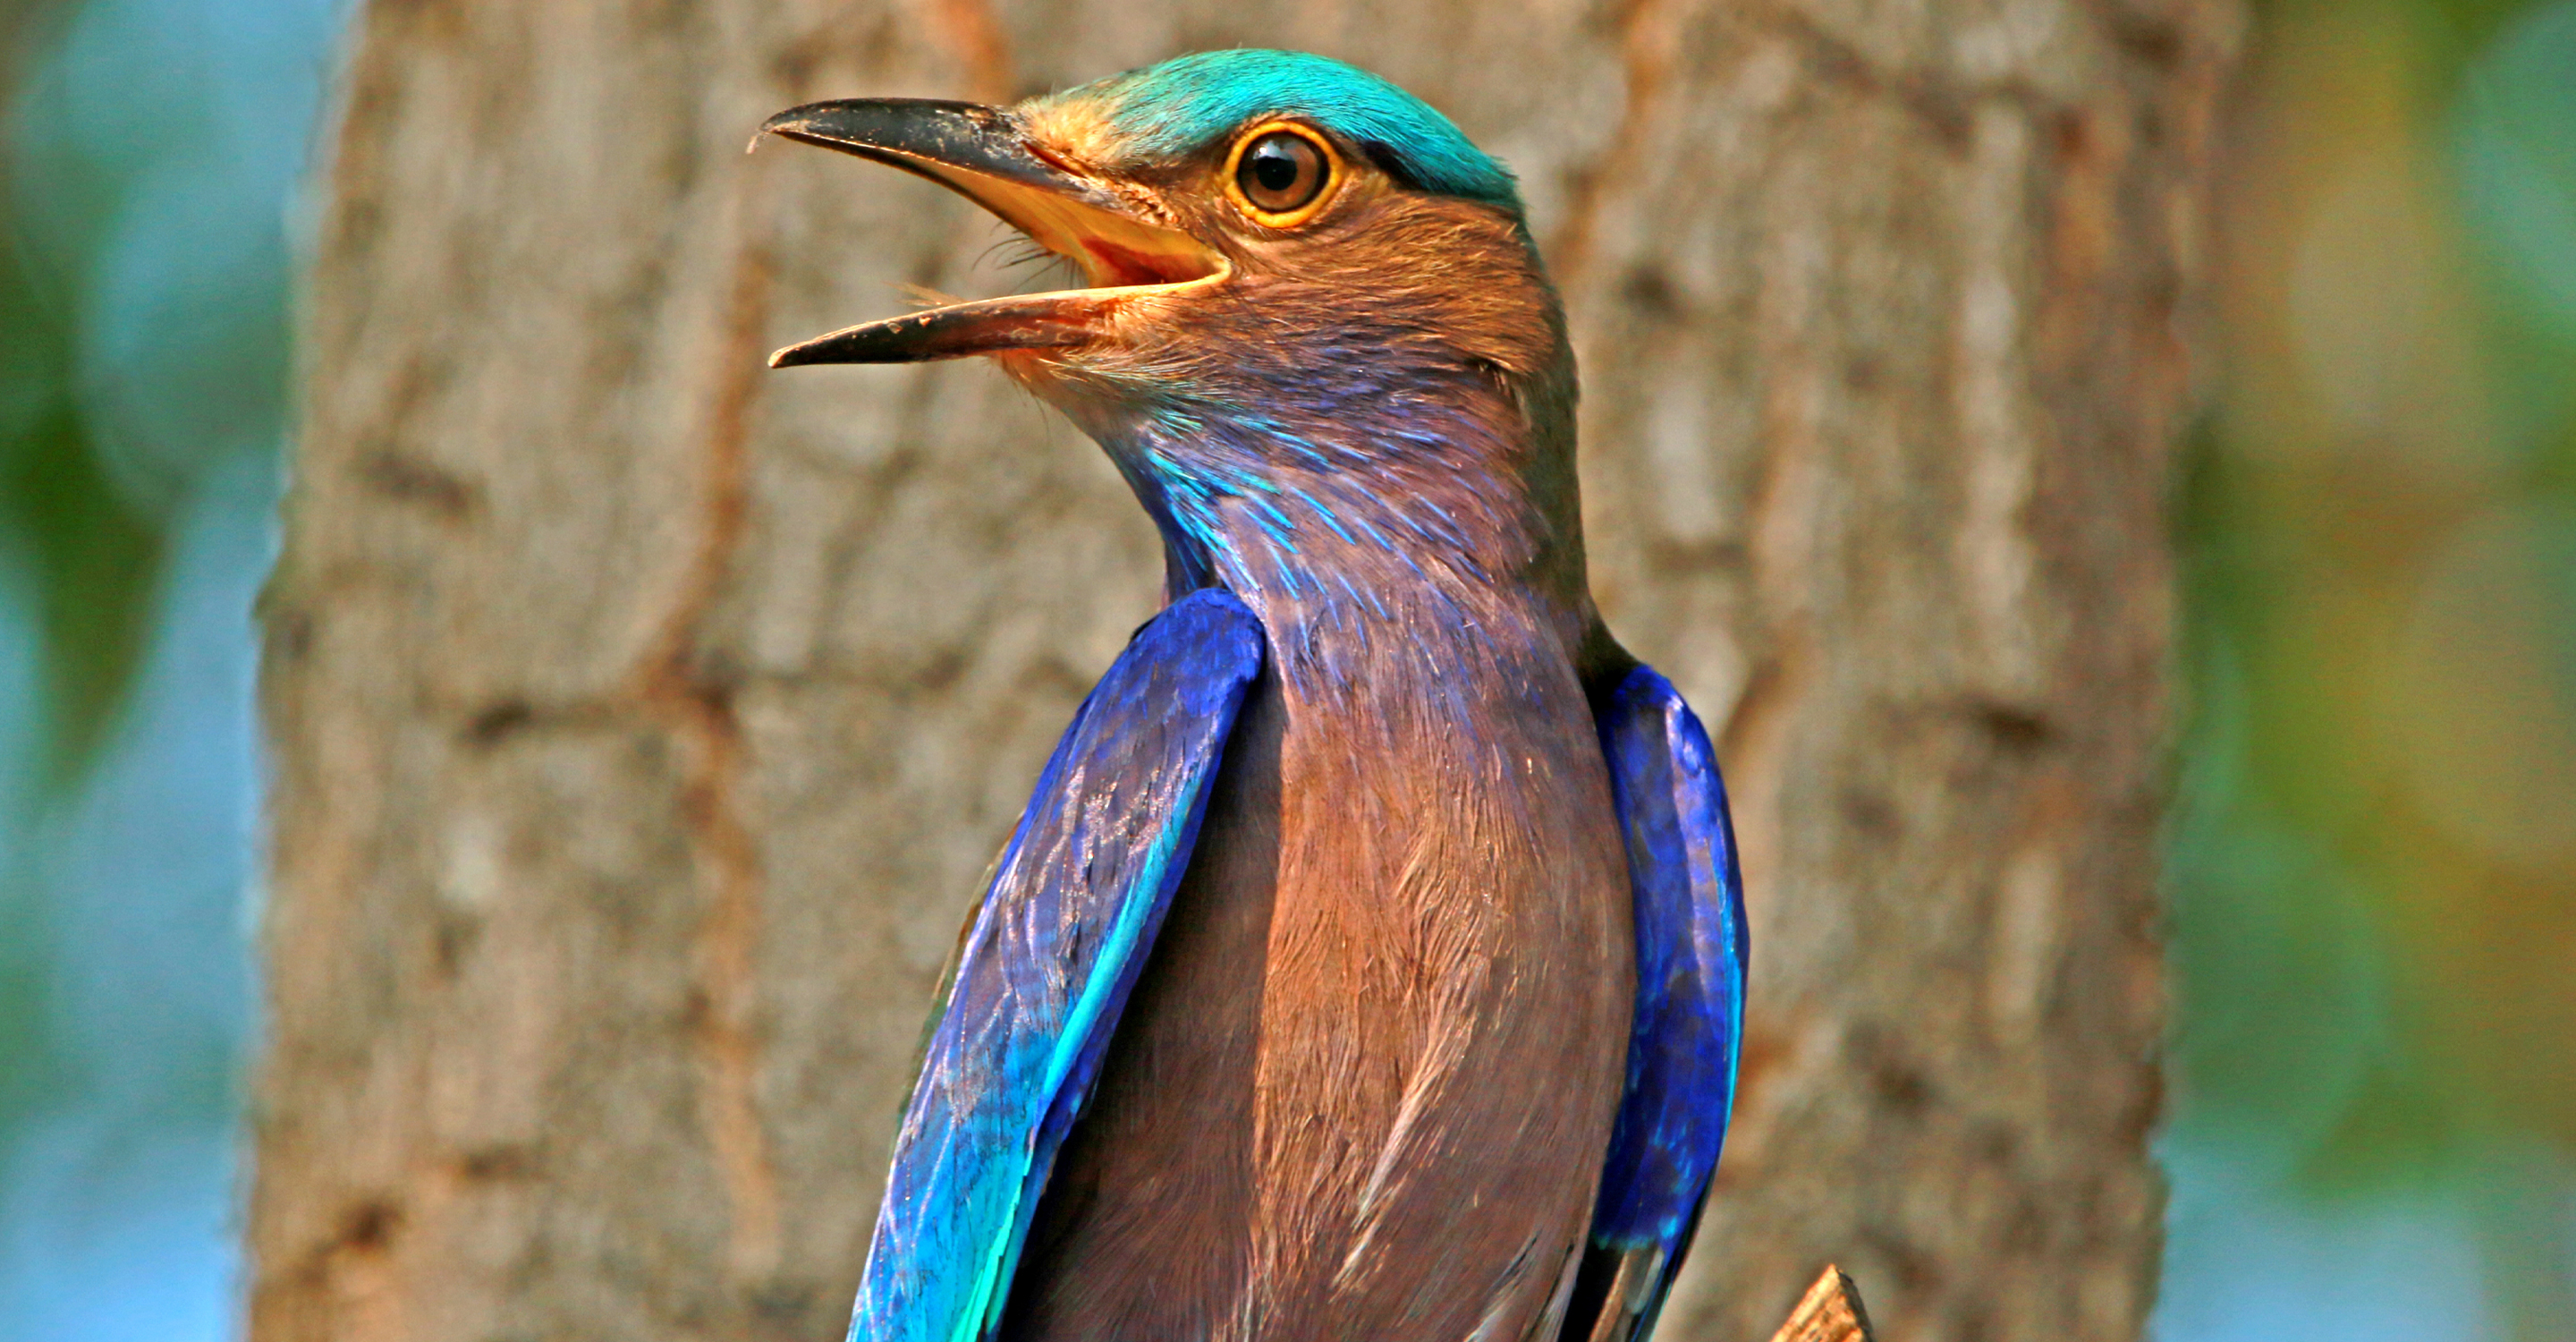 Close-up of an Indian roller in Kanha National Park, India